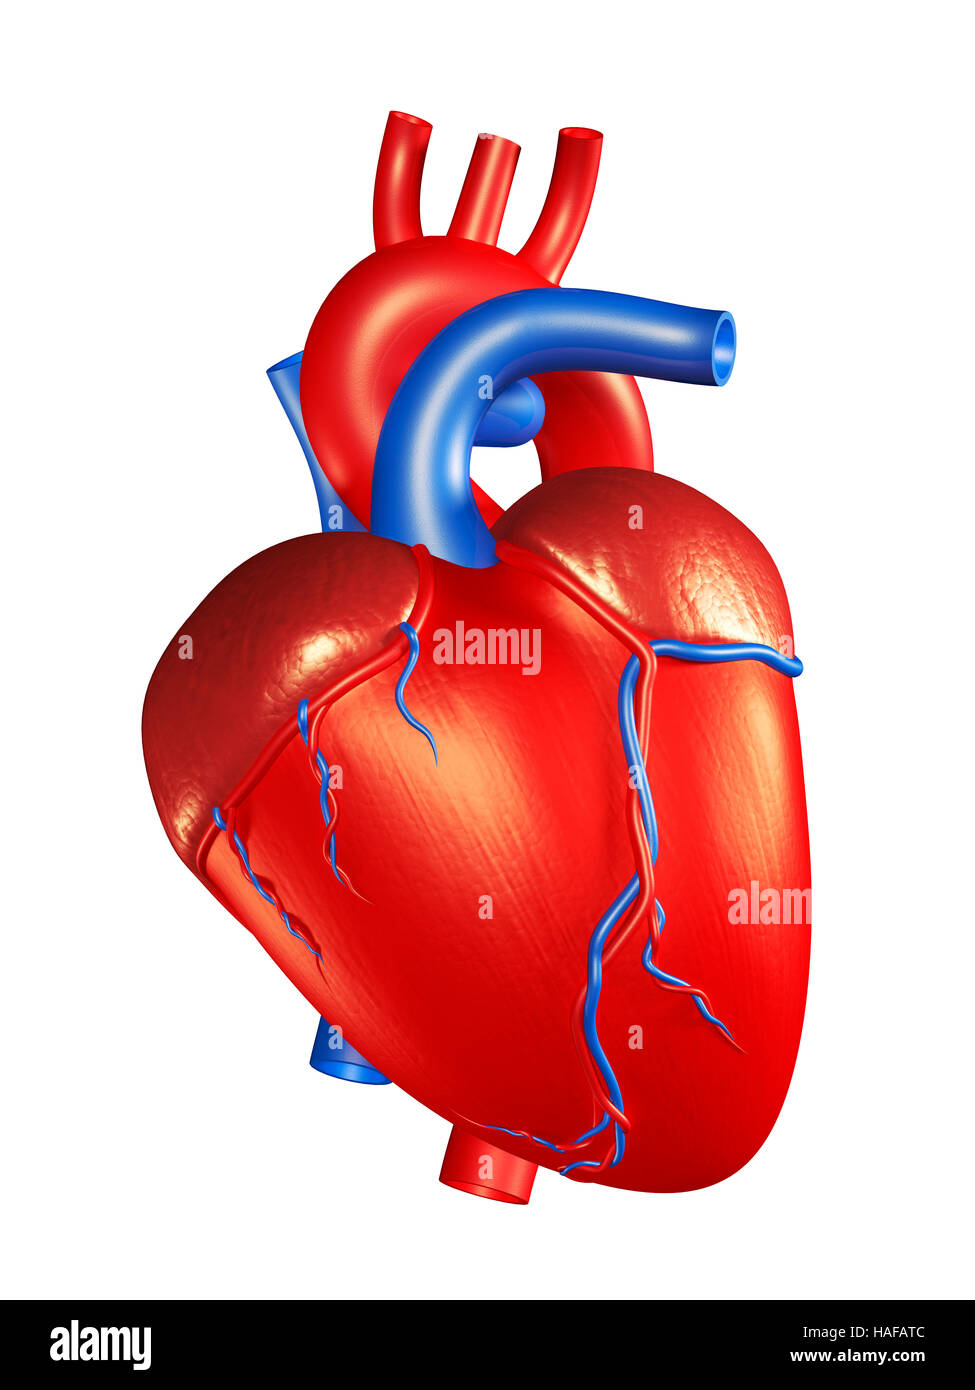 Human Heart 3D Illustration isolated on white background Stock Photo